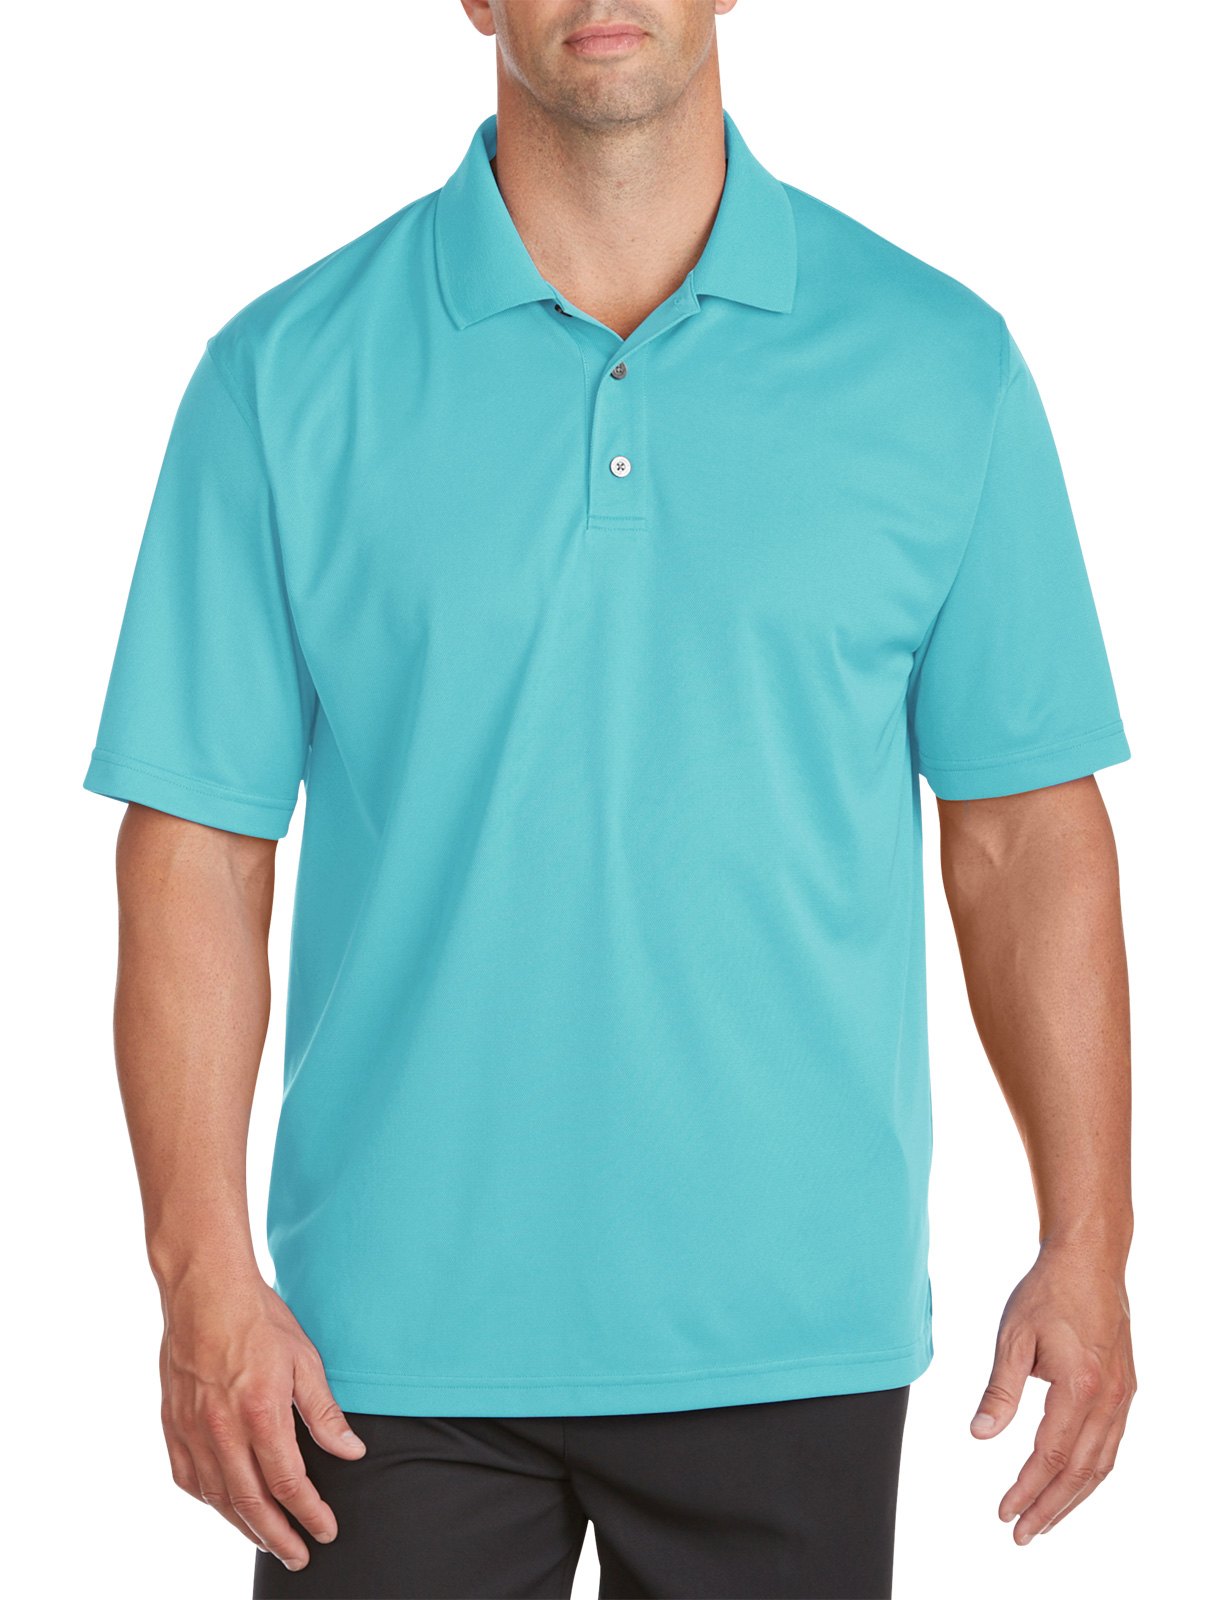 Reebok Men's Big and Tall Golf PlayDry Solid Polo